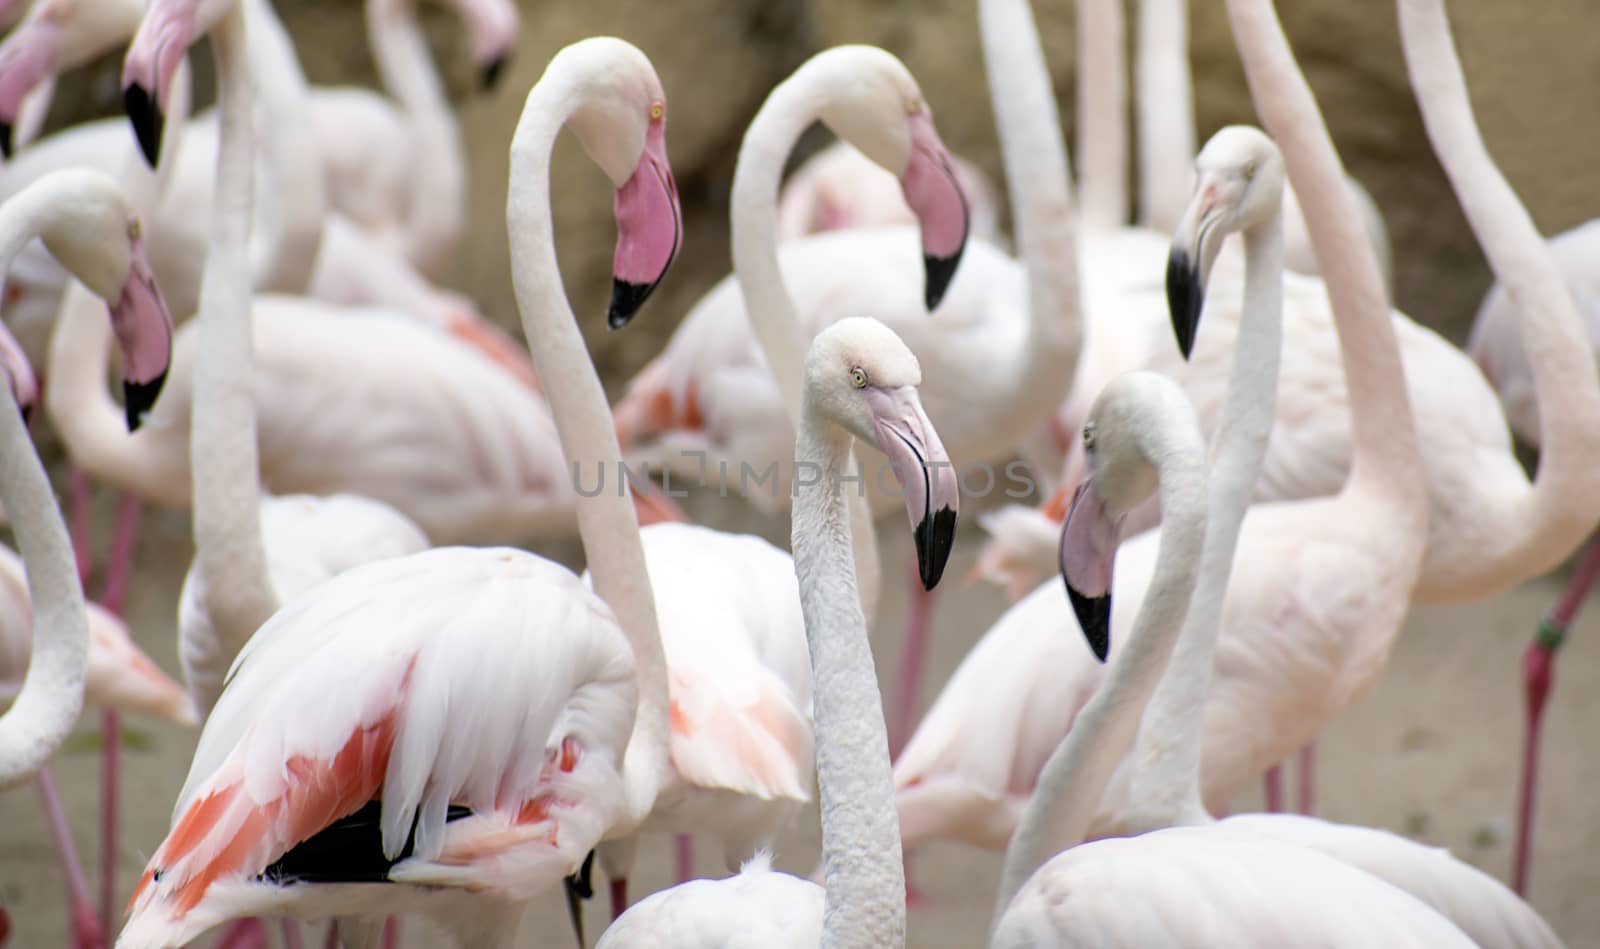 Group of flamingos or Greater flamingo at a pond in a spanish Zoo, looking at camera with extremely narrow depth of field. by worledit